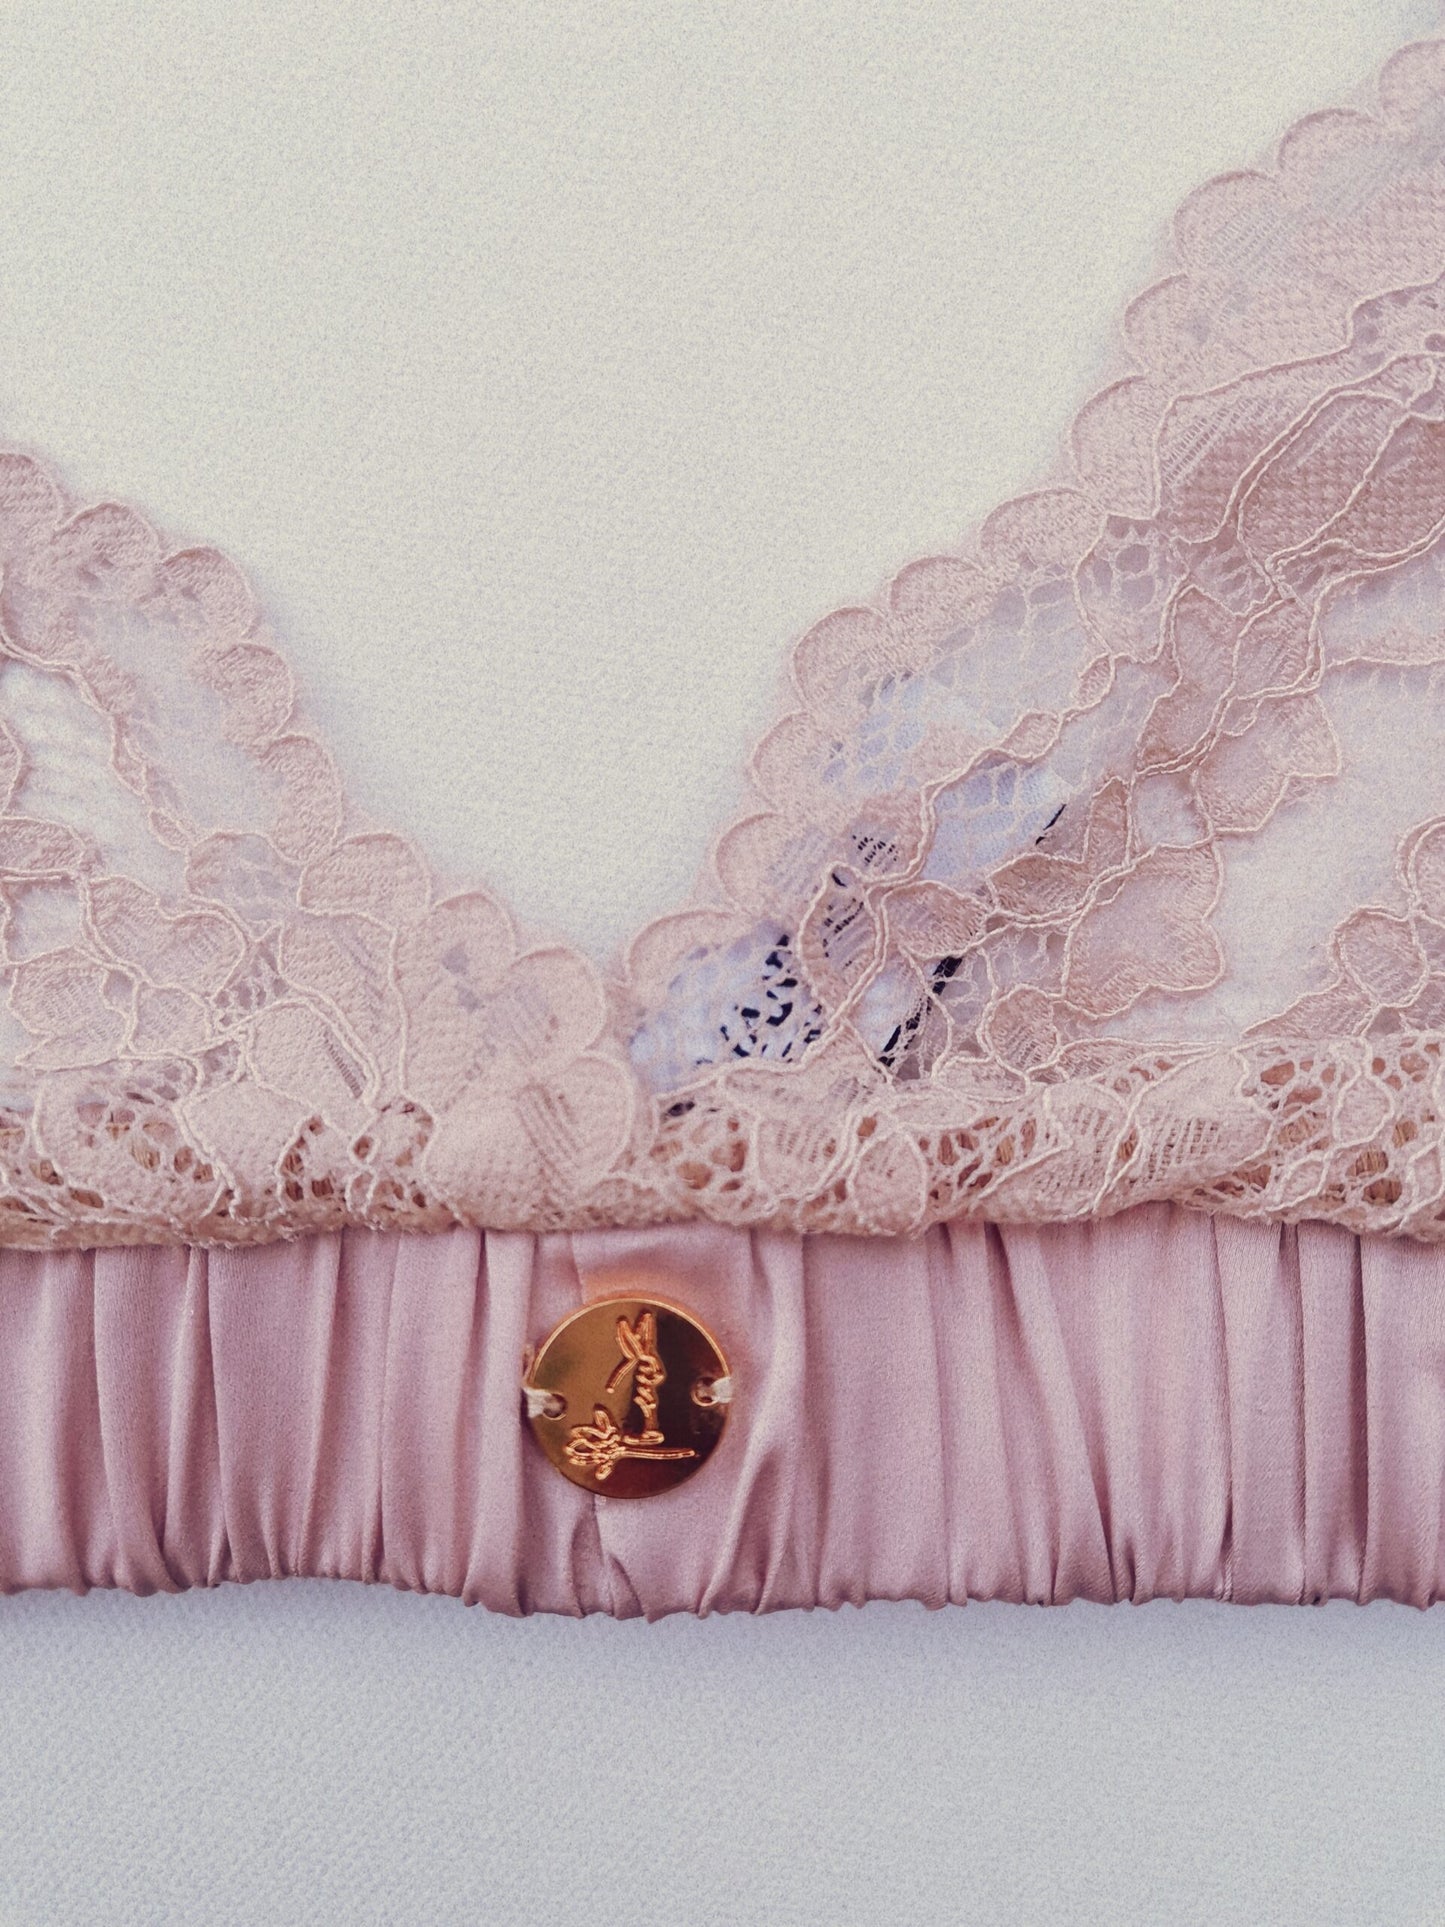 Close up photo of a light pink lace bralet showing the garment details such as the small rose gold logo